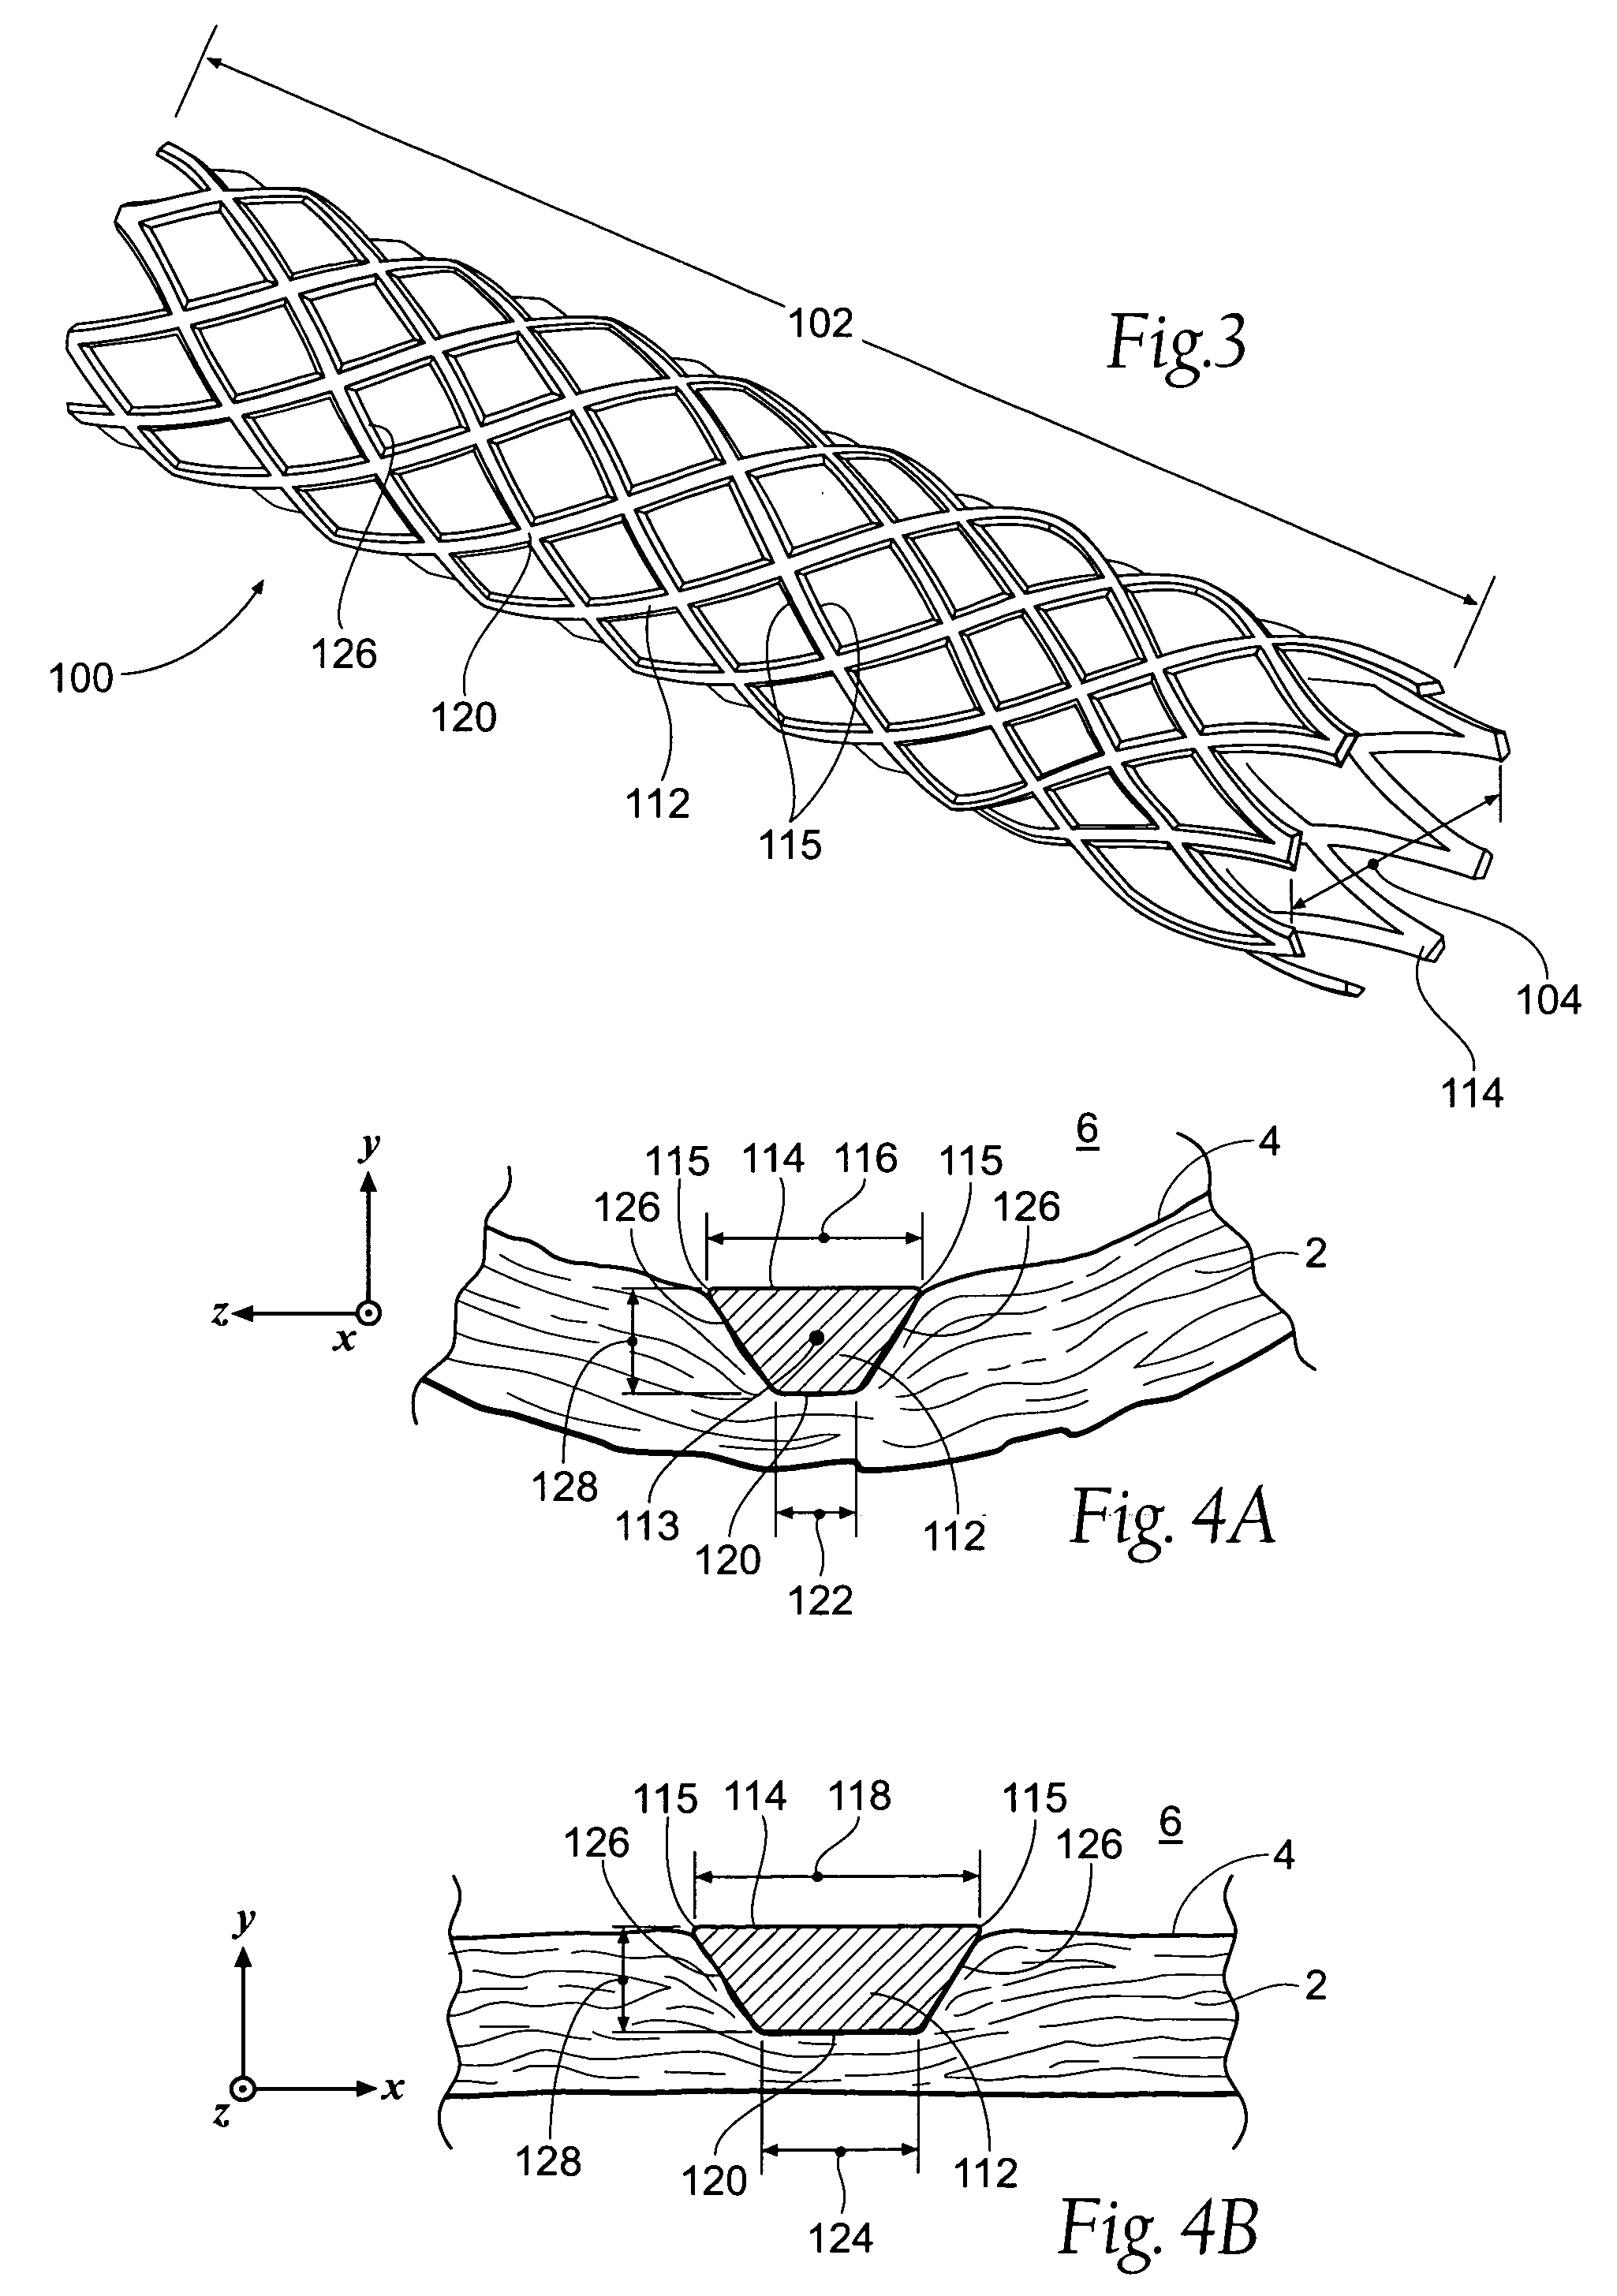 Apparatus and method for minimizing flow disturbances in a stented region of a lumen